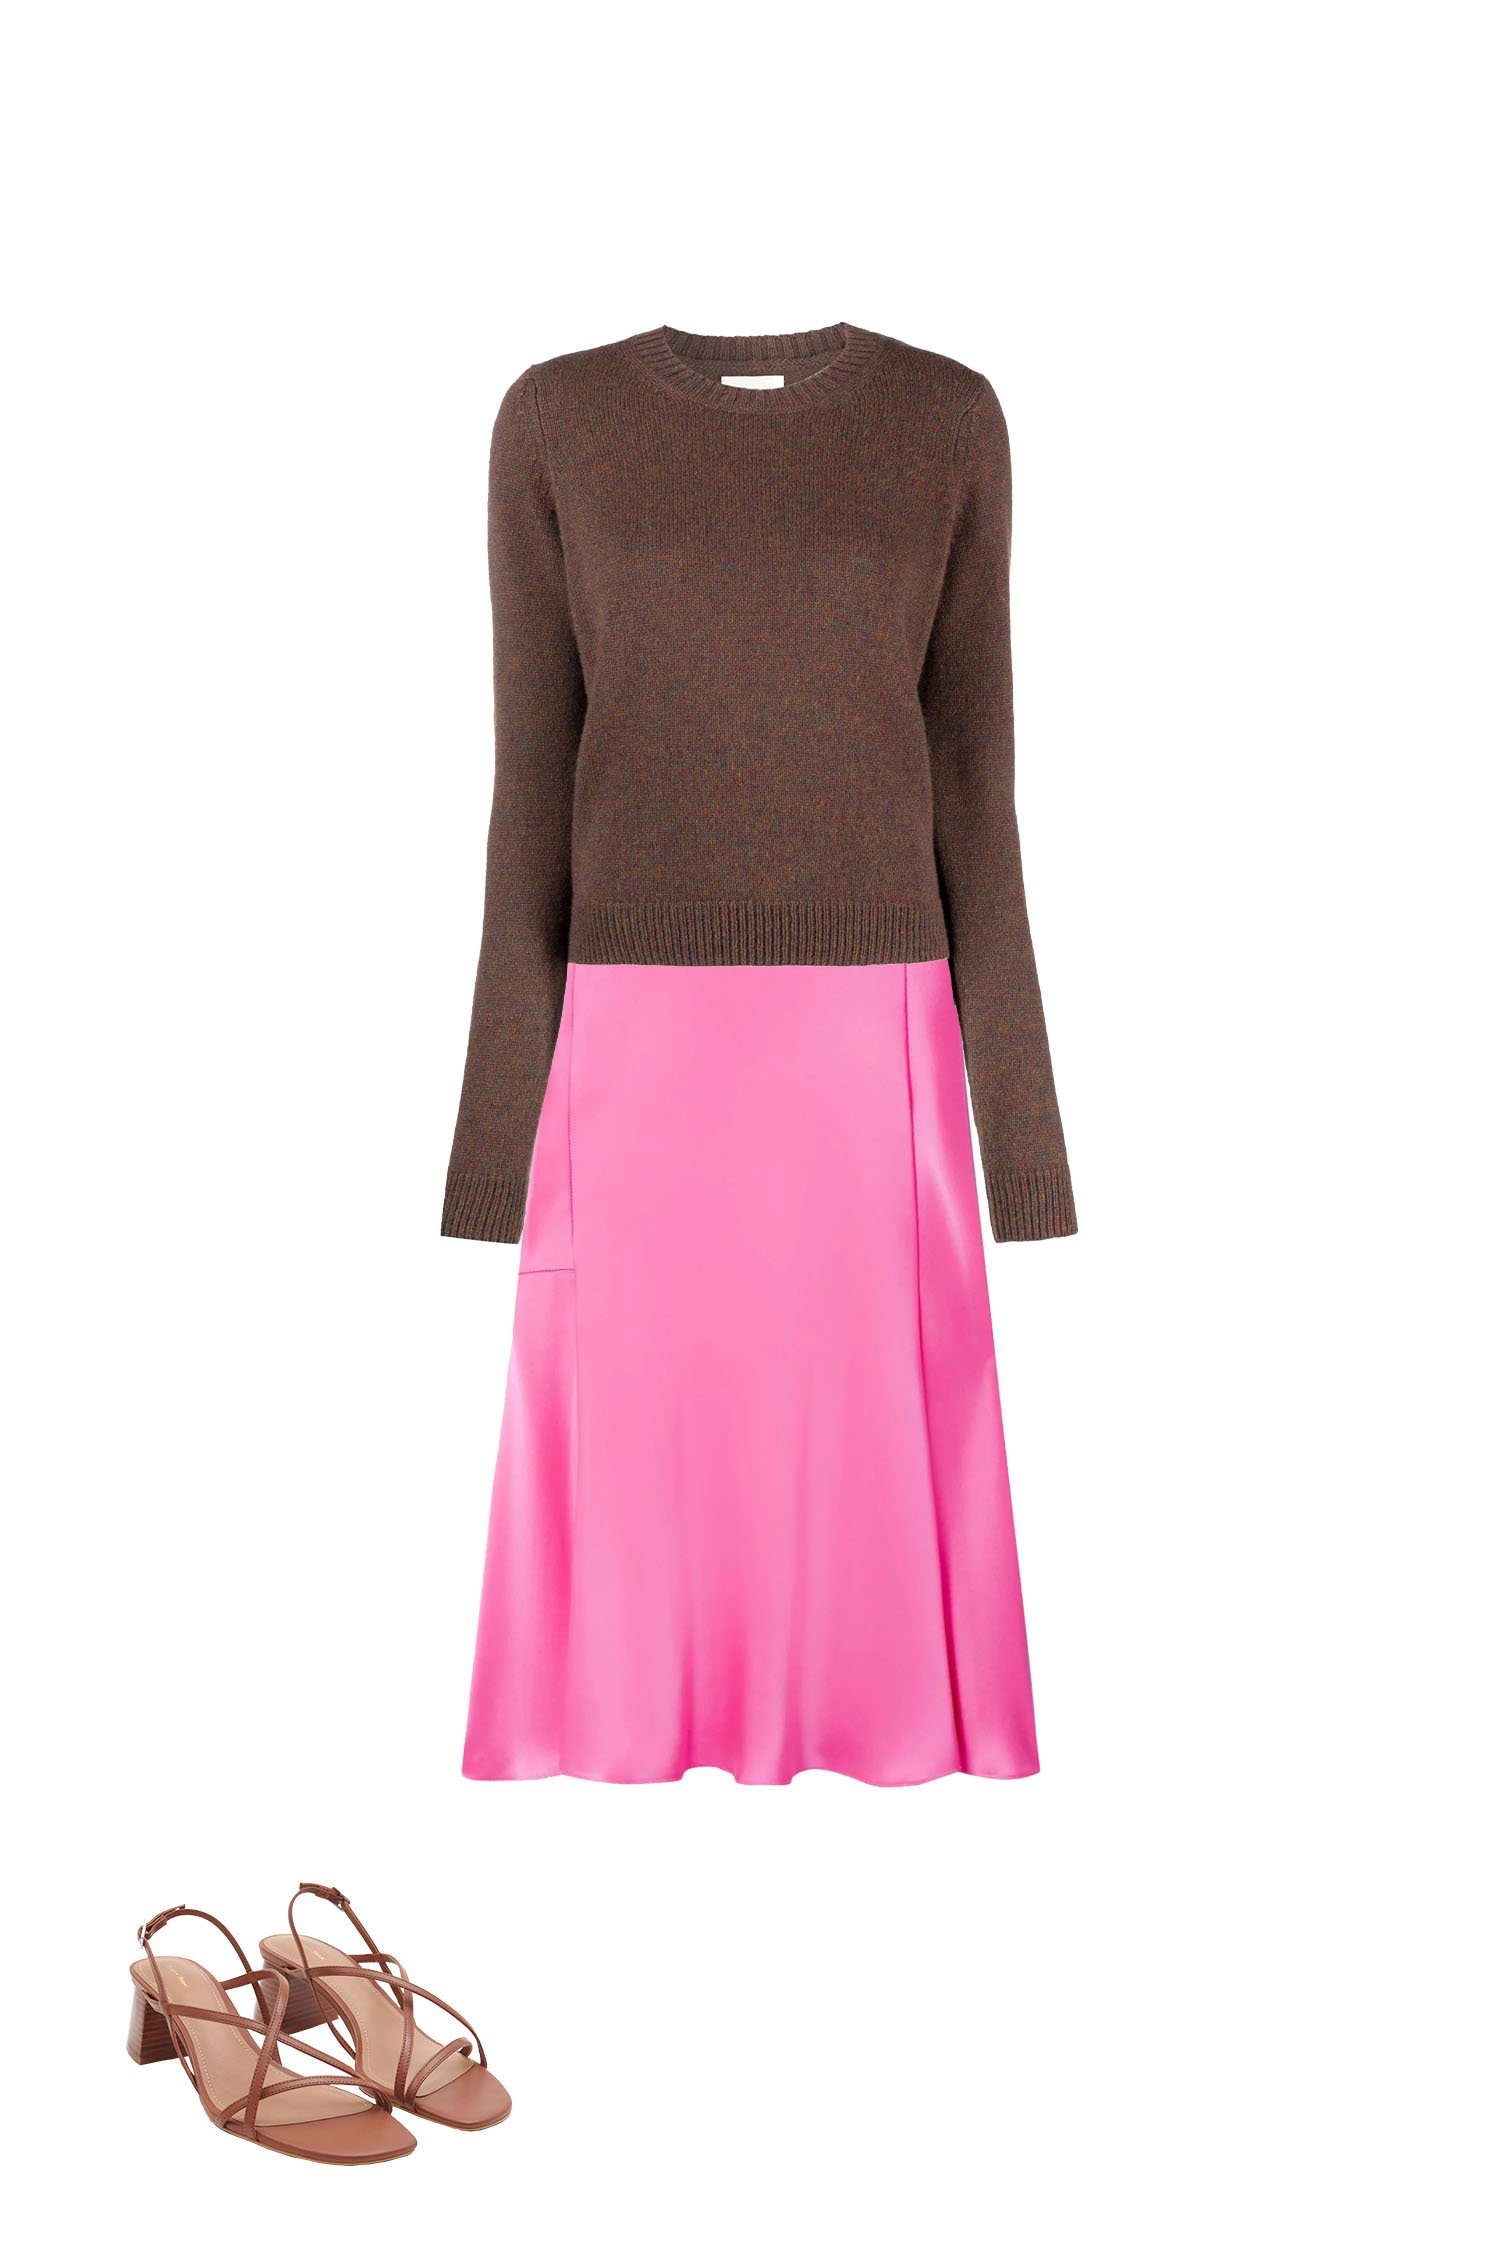 Hot Pink Satin Skirt with Brown Crewneck Sweater Outfit